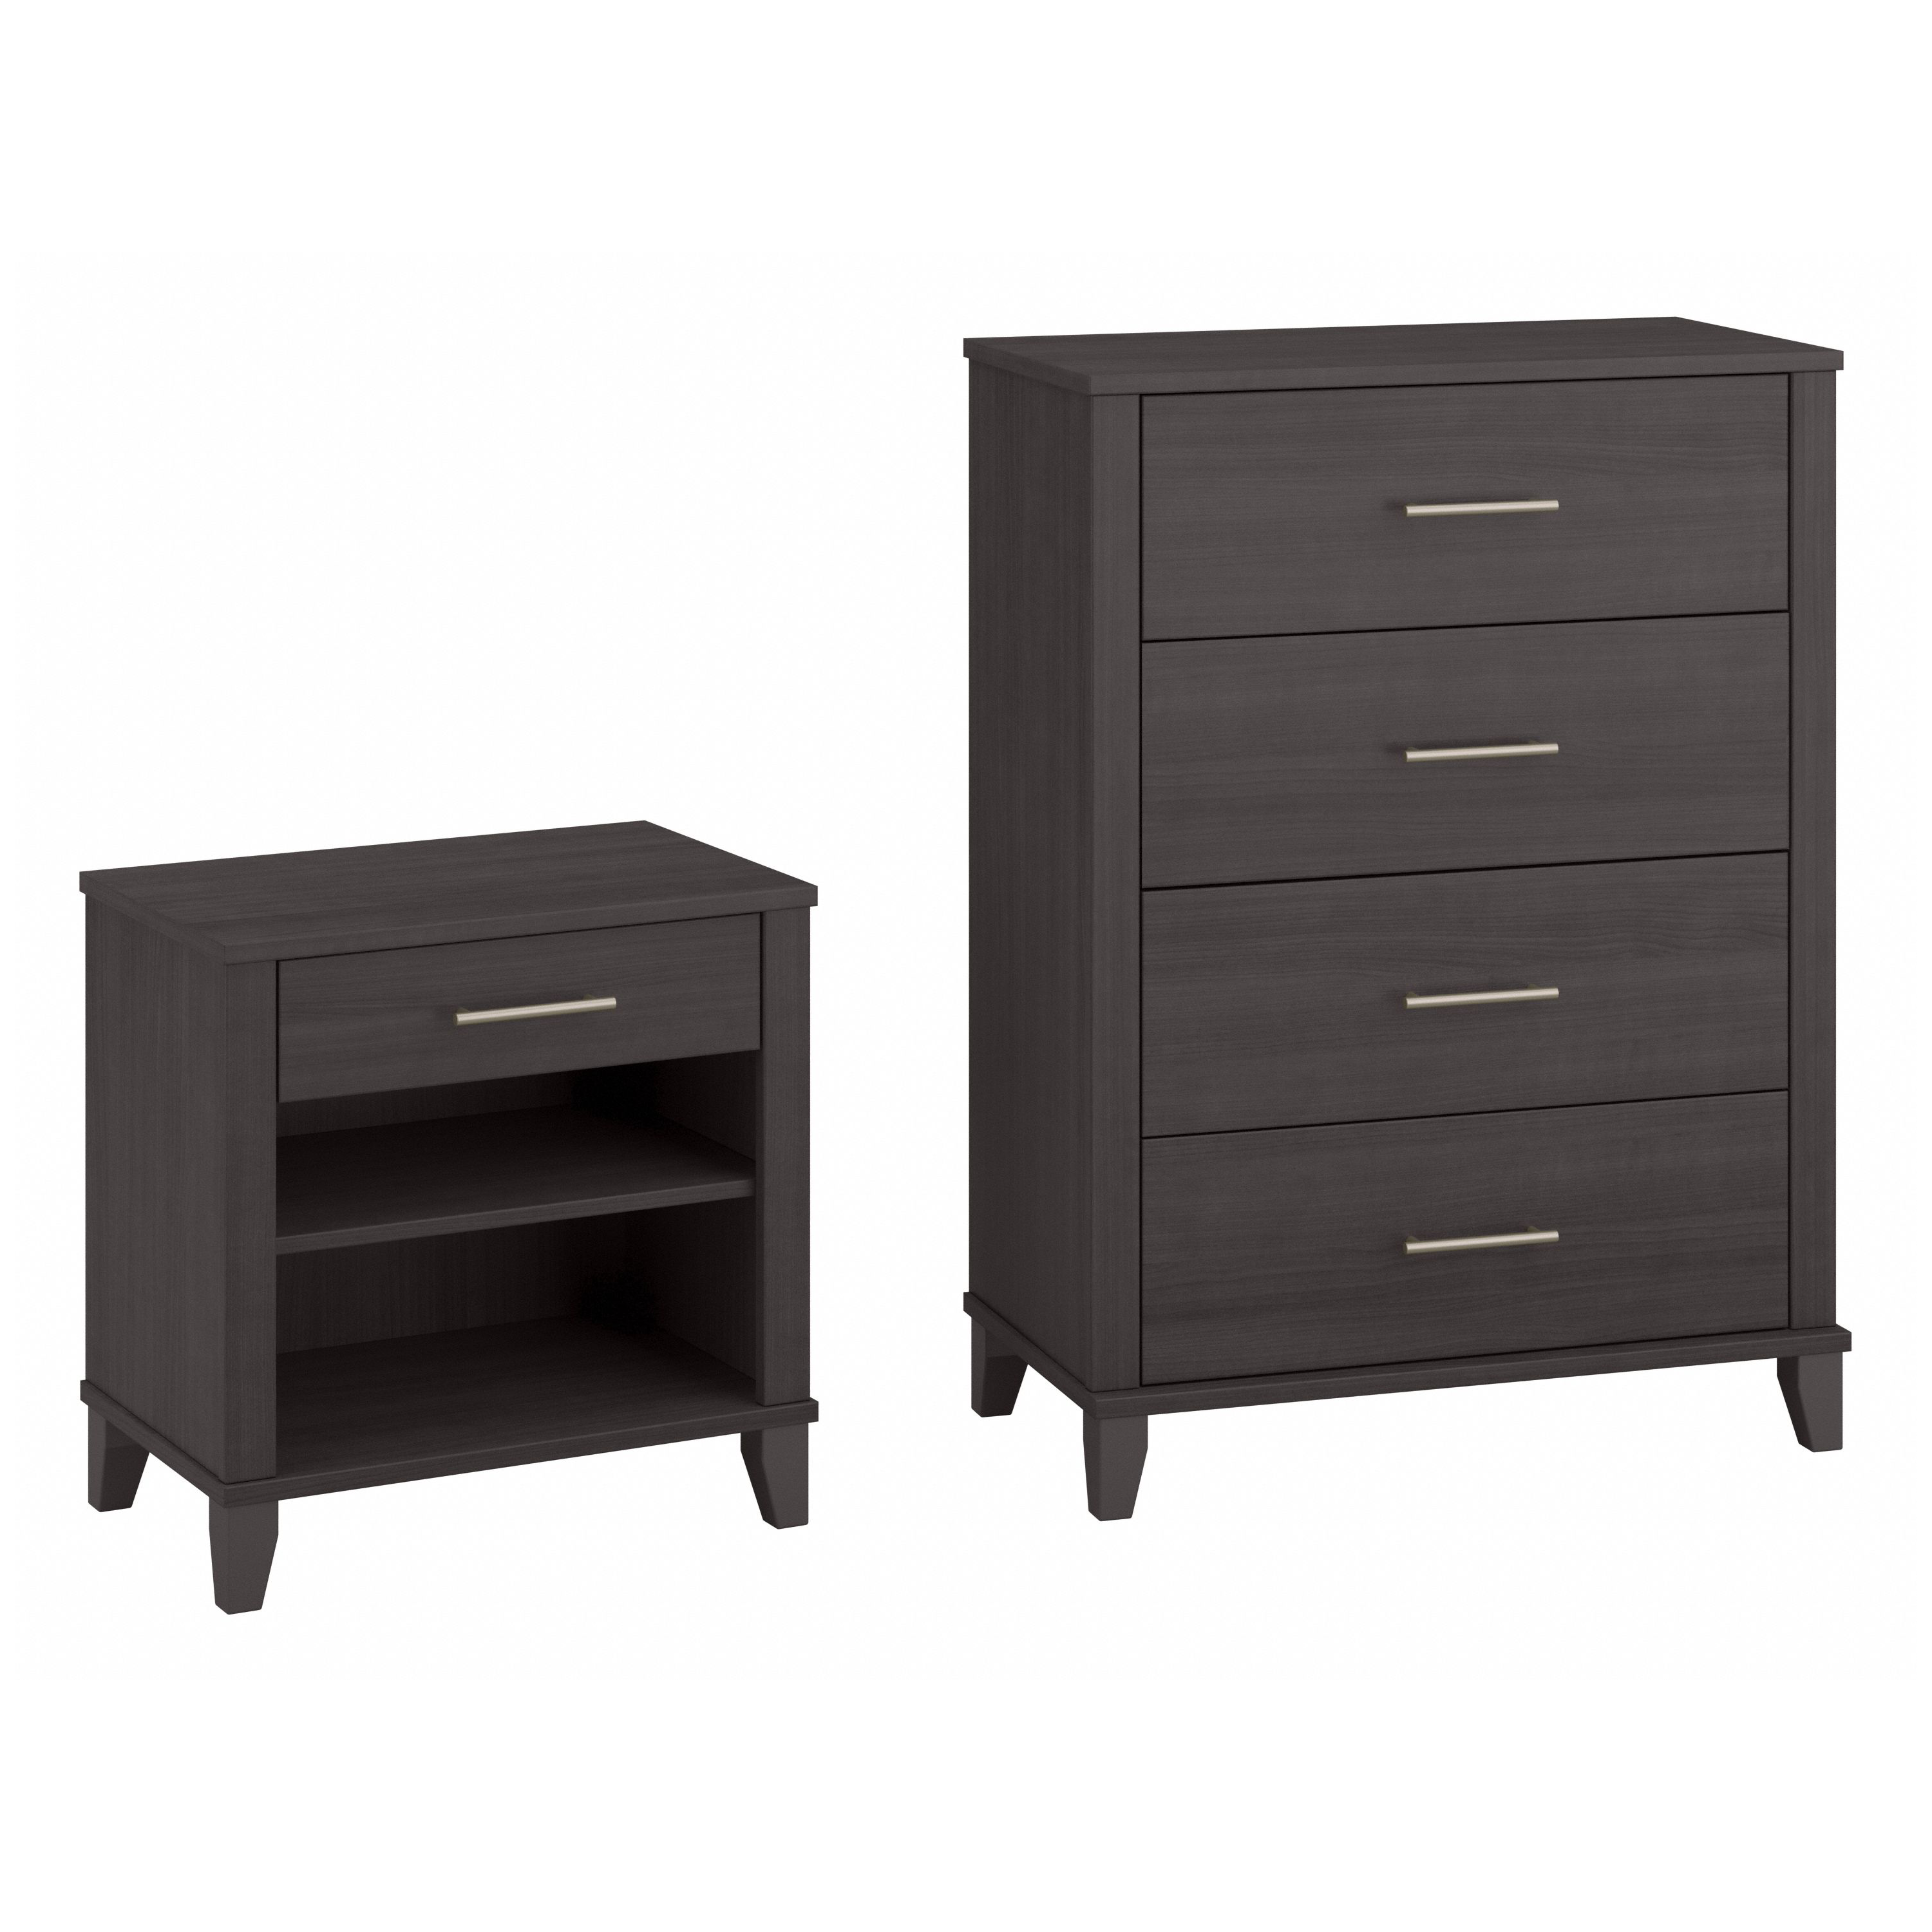 Shop Bush Furniture Somerset Chest of Drawers and Nightstand Set 02 SET034SG #color_storm gray